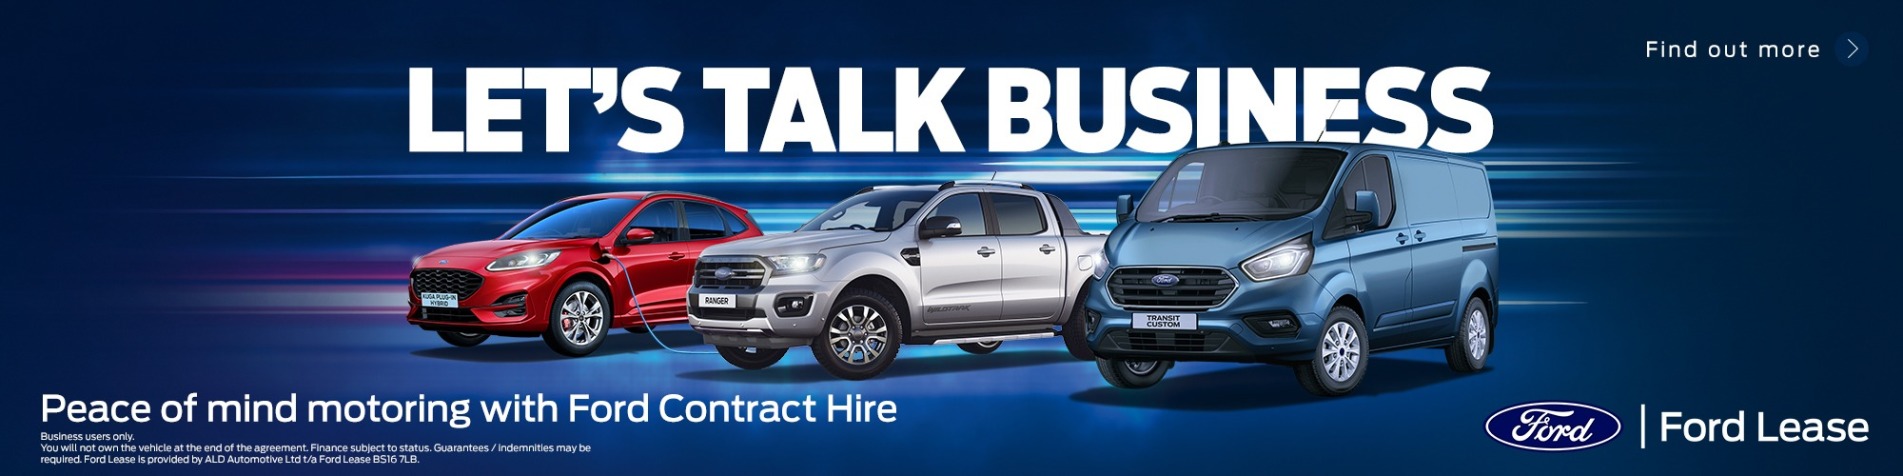 Ford Business Banner